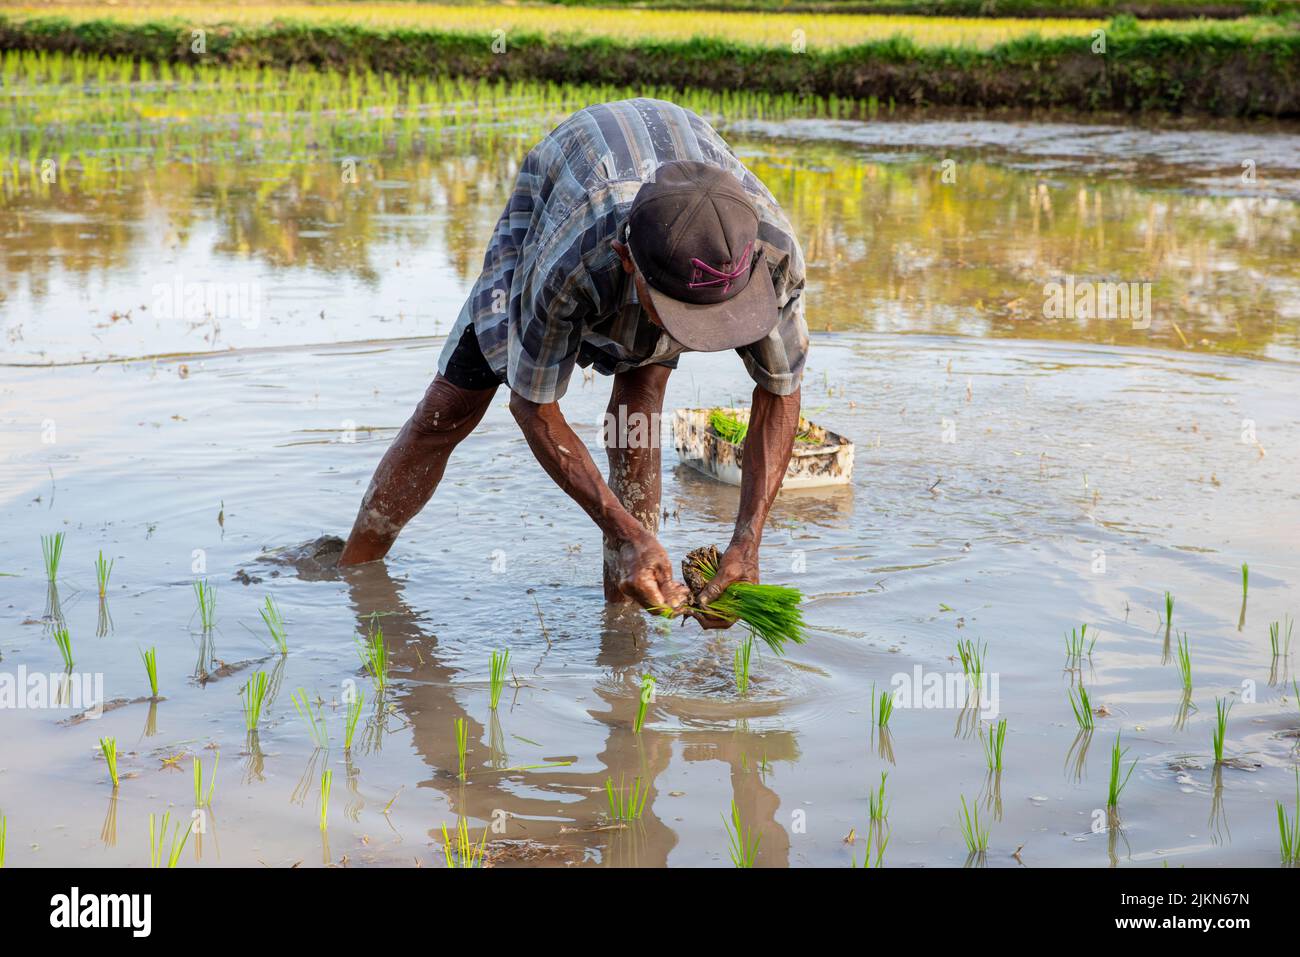 A South Asian male working at the rice field in Bali, Indonesia Stock Photo